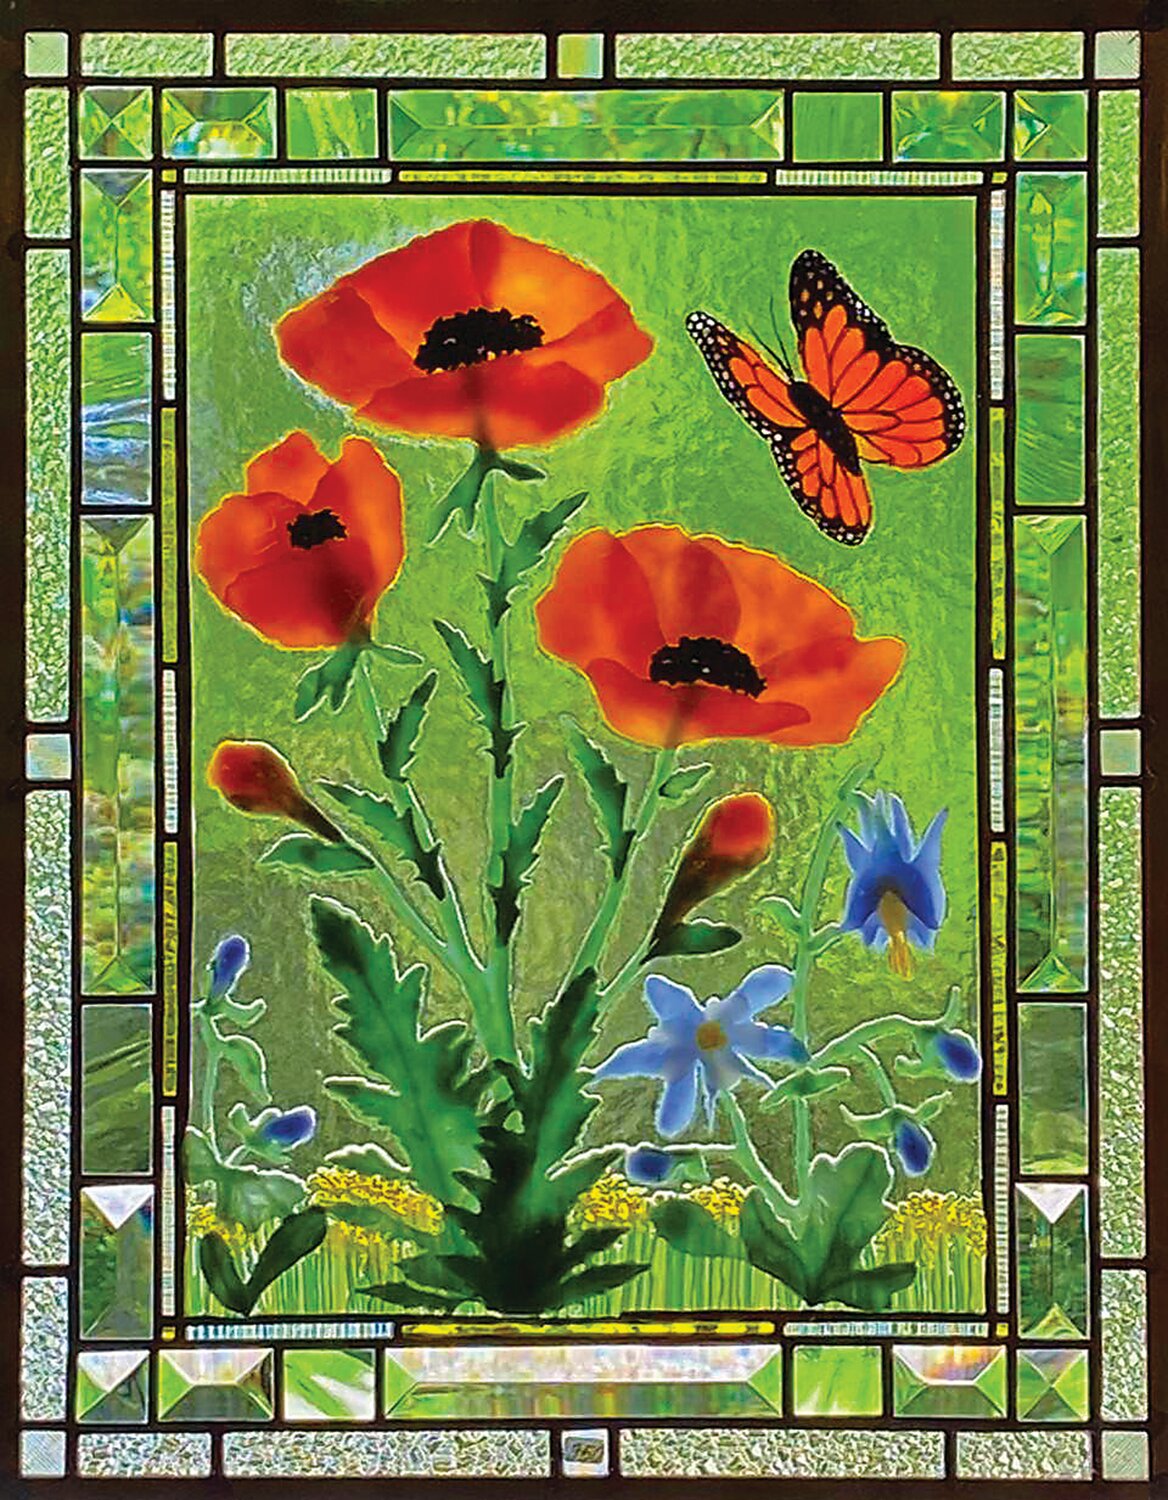 “Orange Poppies” is a fused glass panel by Karen Caldwell of Sunflower Glass Studio.